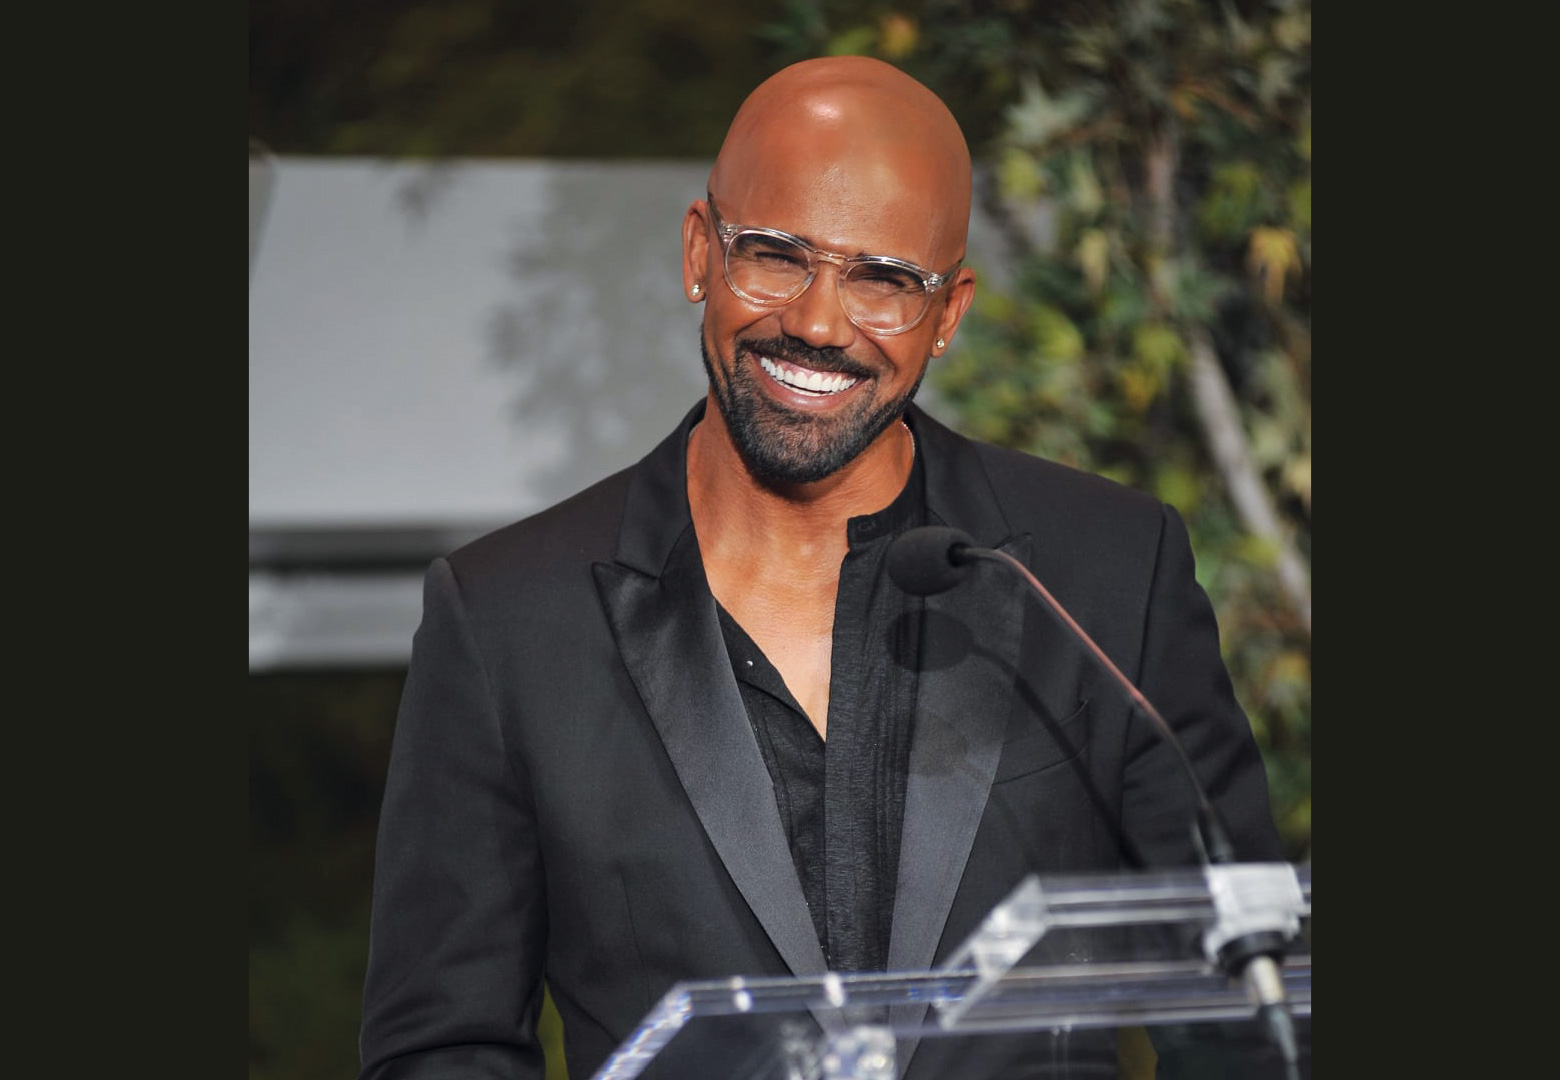 skirball-reopens-reserve-officer-of-the-year-twice-a-citizen-gala-1-shemar-moore